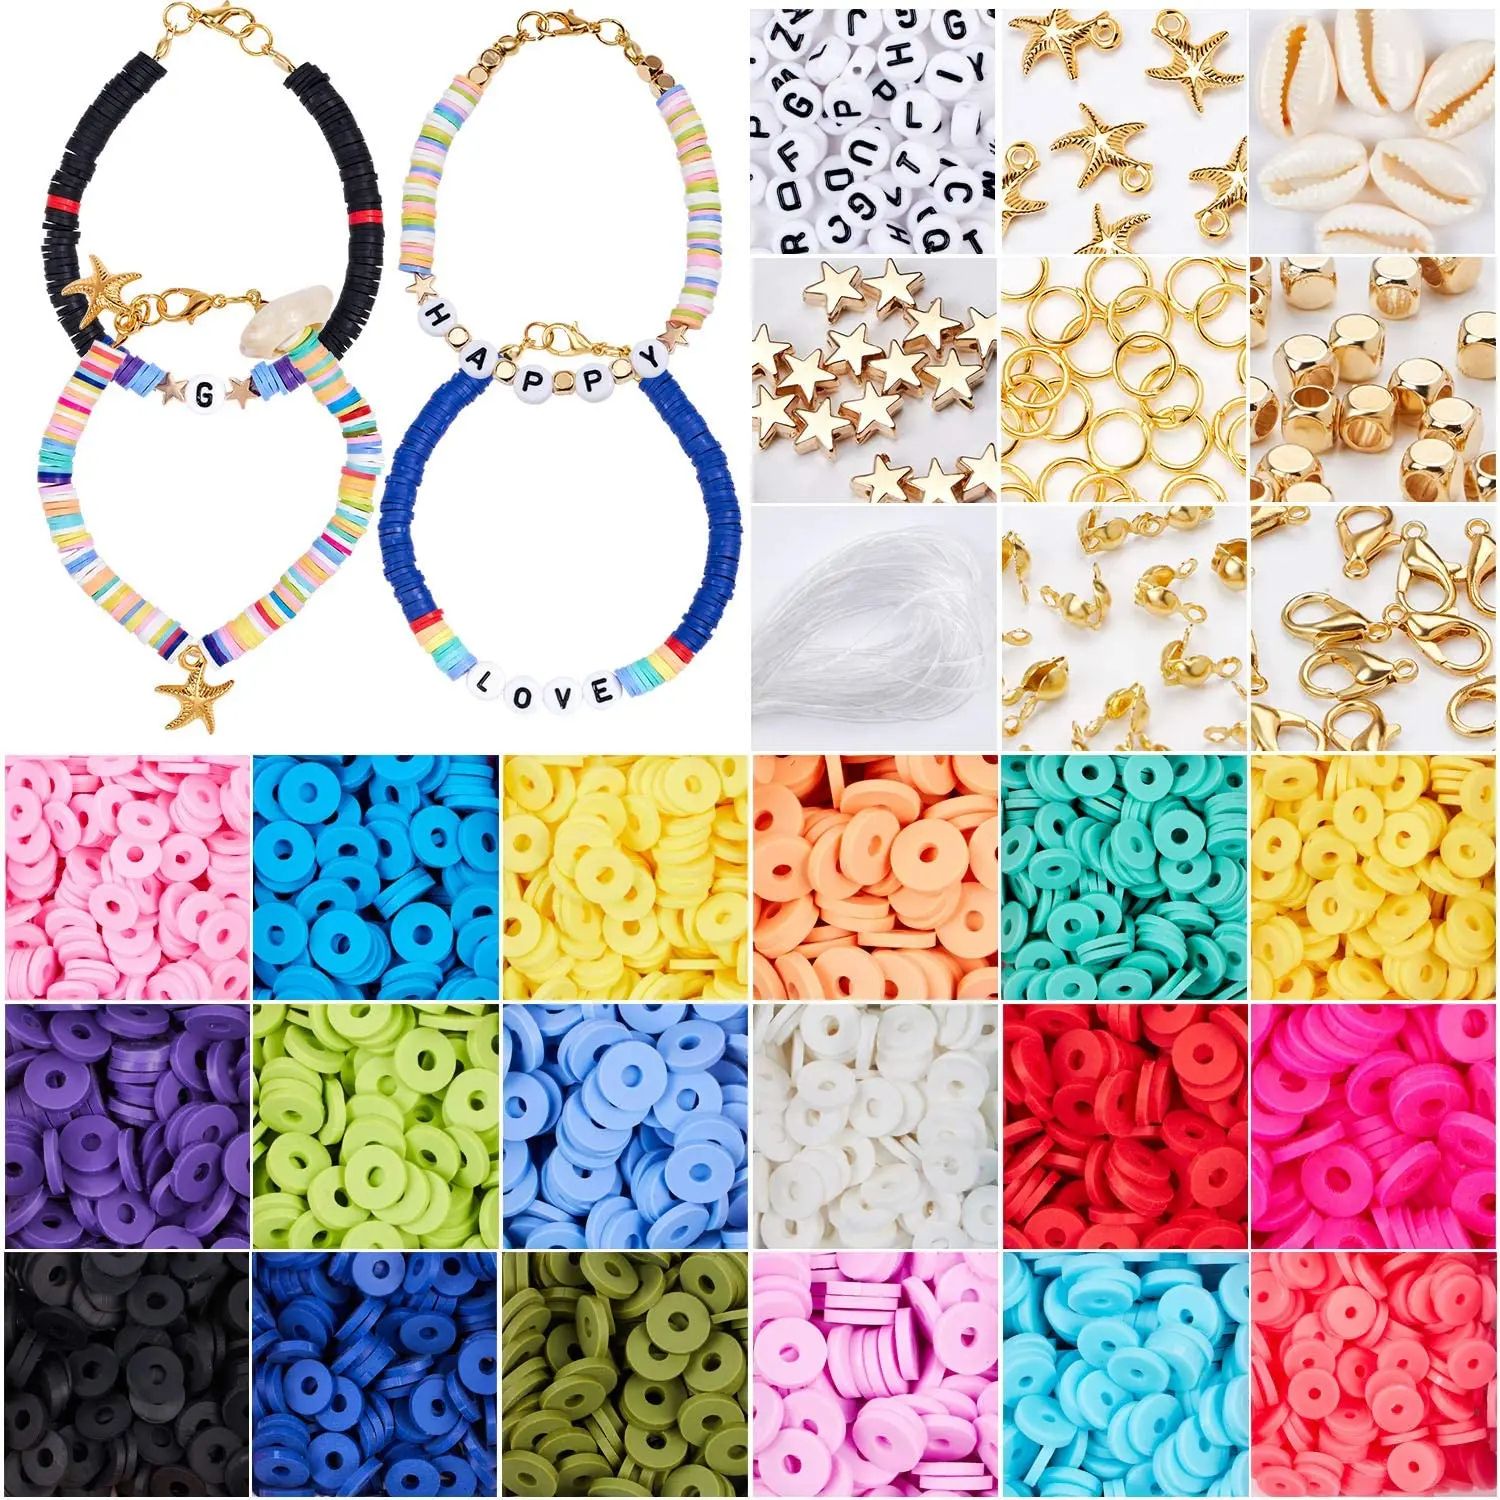 HUGE LOT OF~450~IRIDESCENT BEADS SPACER JEWELRY MAKING~DIY KIDS CRAFTS~NECKLACES 